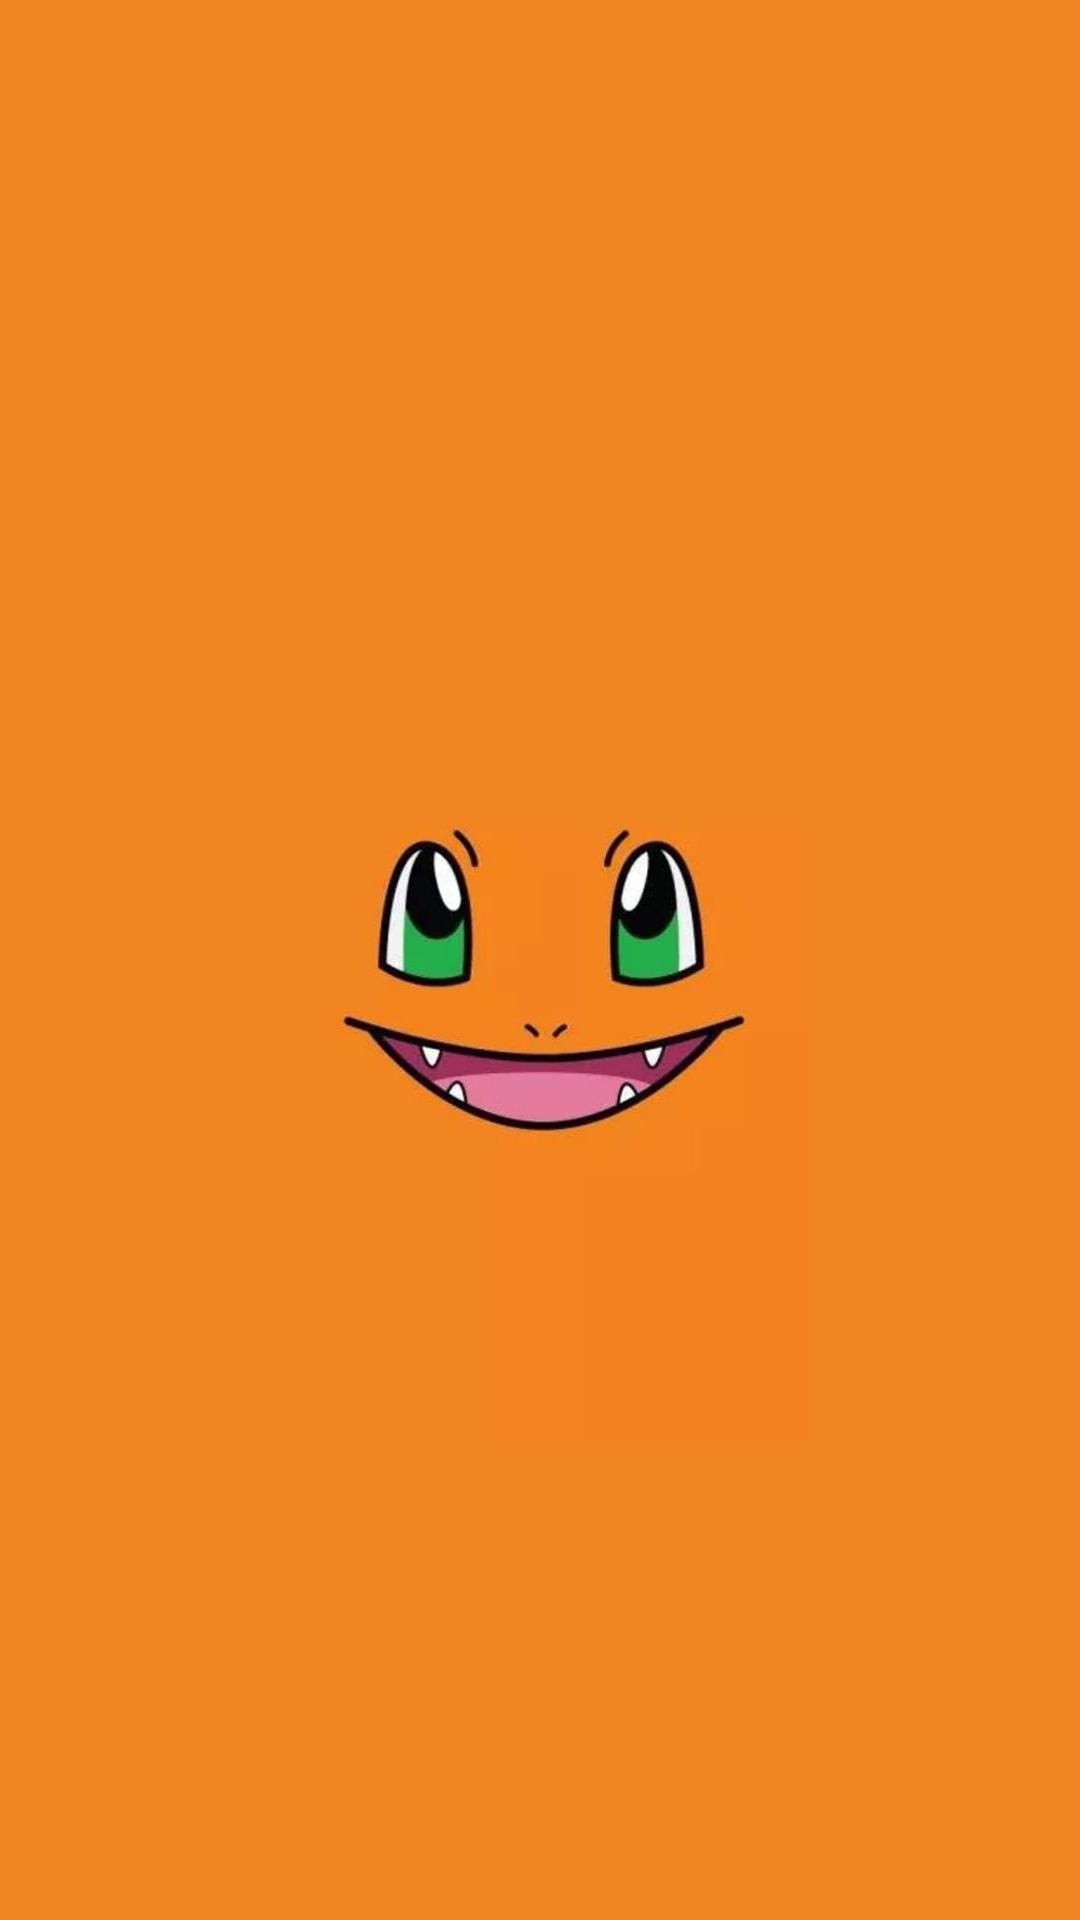 Charmander Pokemon Android wallpaper – Android HD wallpapers